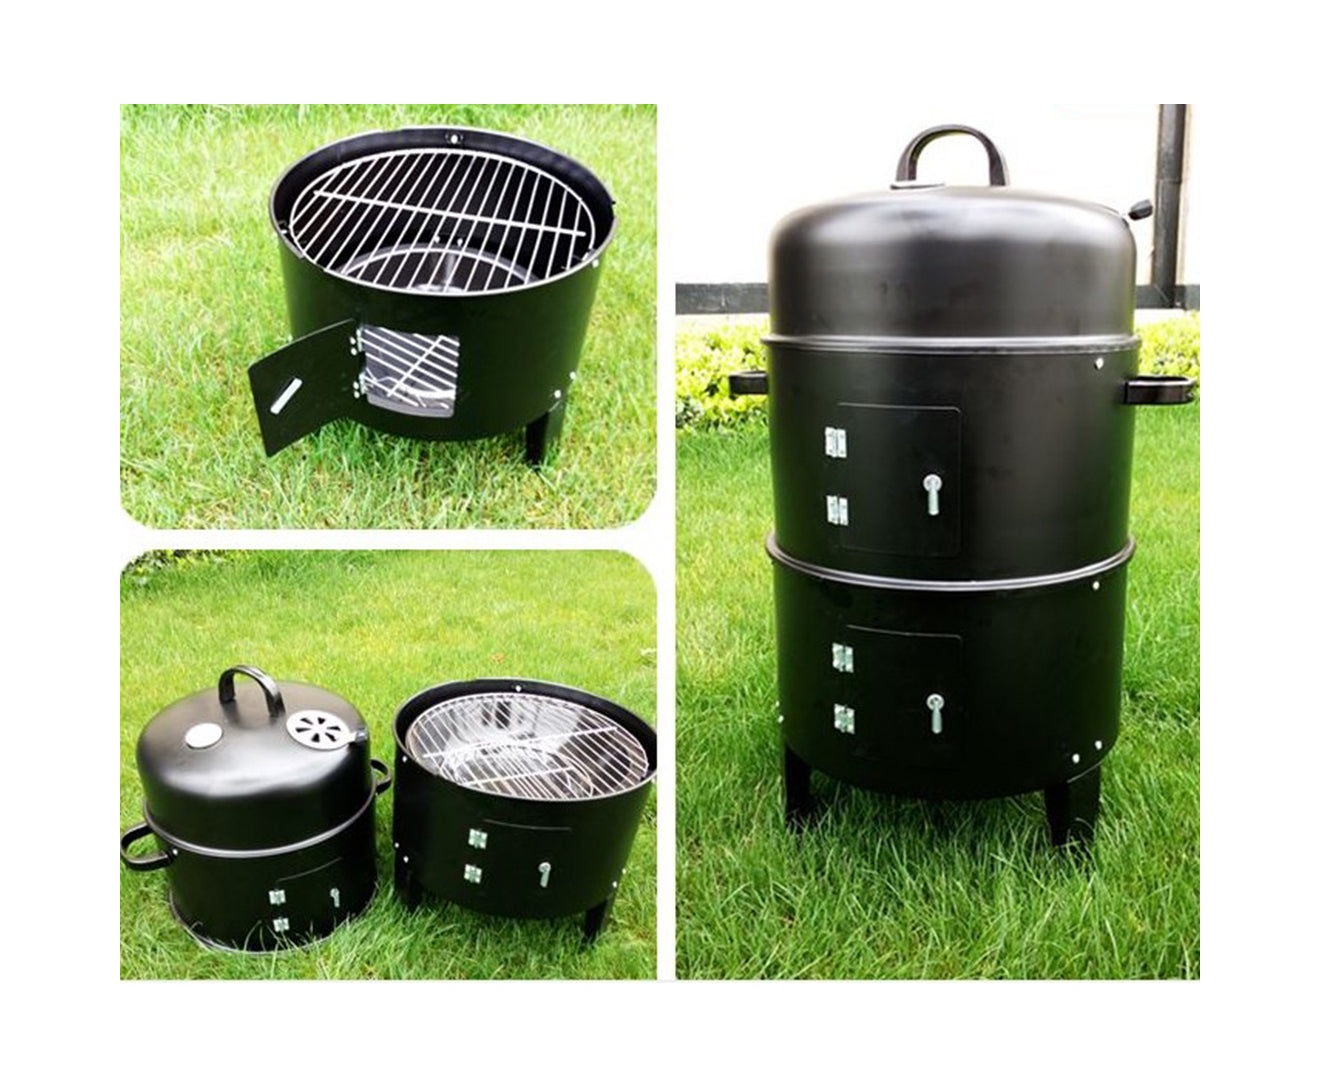 Premium 2X 3 in 1 Barbecue Smoker Outdoor Charcoal BBQ Grill Camping Picnic Fishing - image5